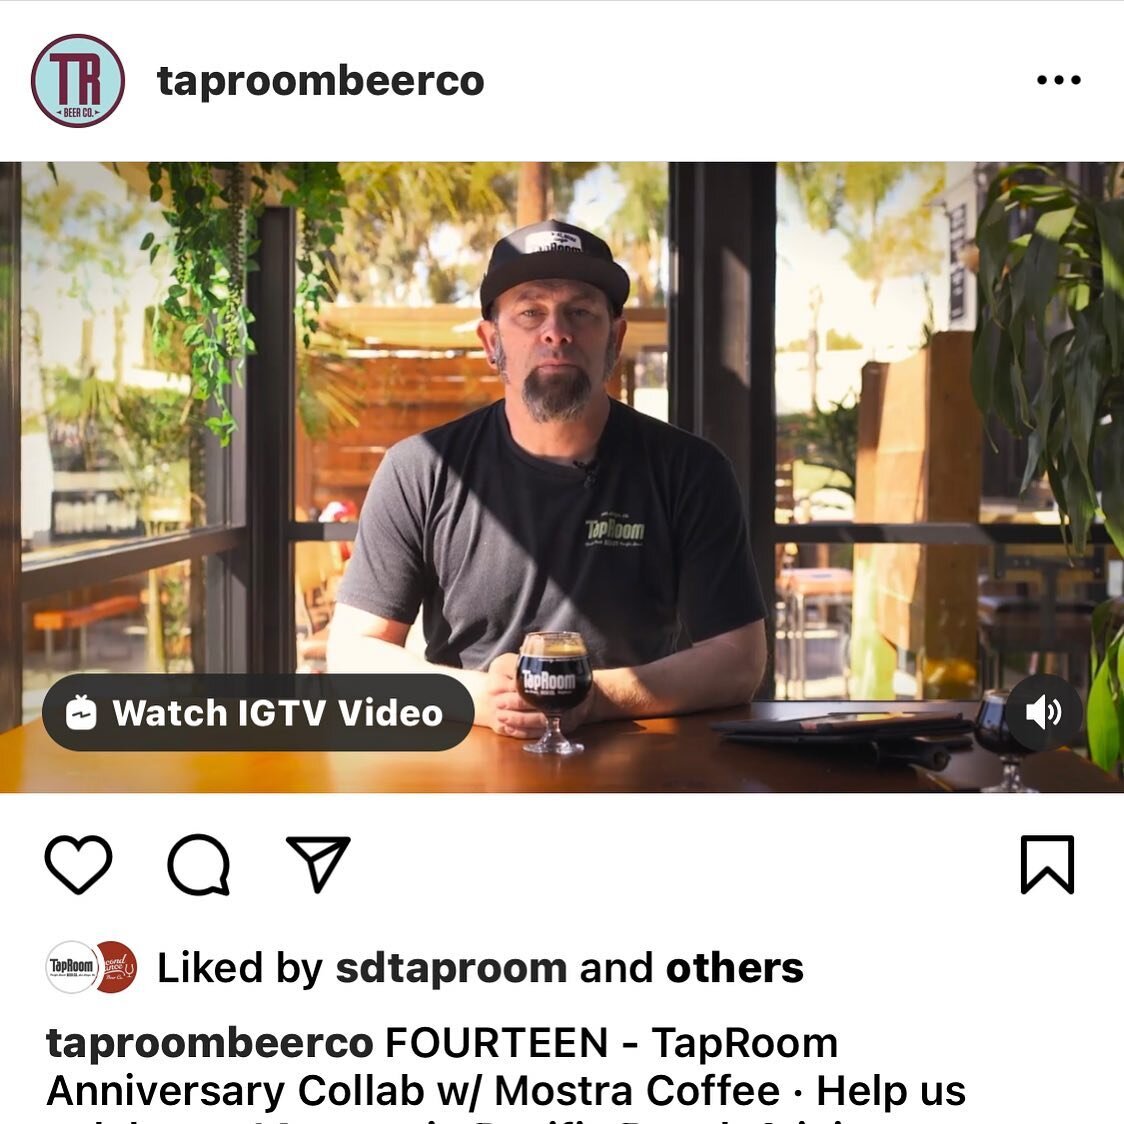 Such good things happening at @taproombeerco @sdtaproom !!!!
Cannot wait!
#mostracoffee #taproom #sdbeer @billbatten